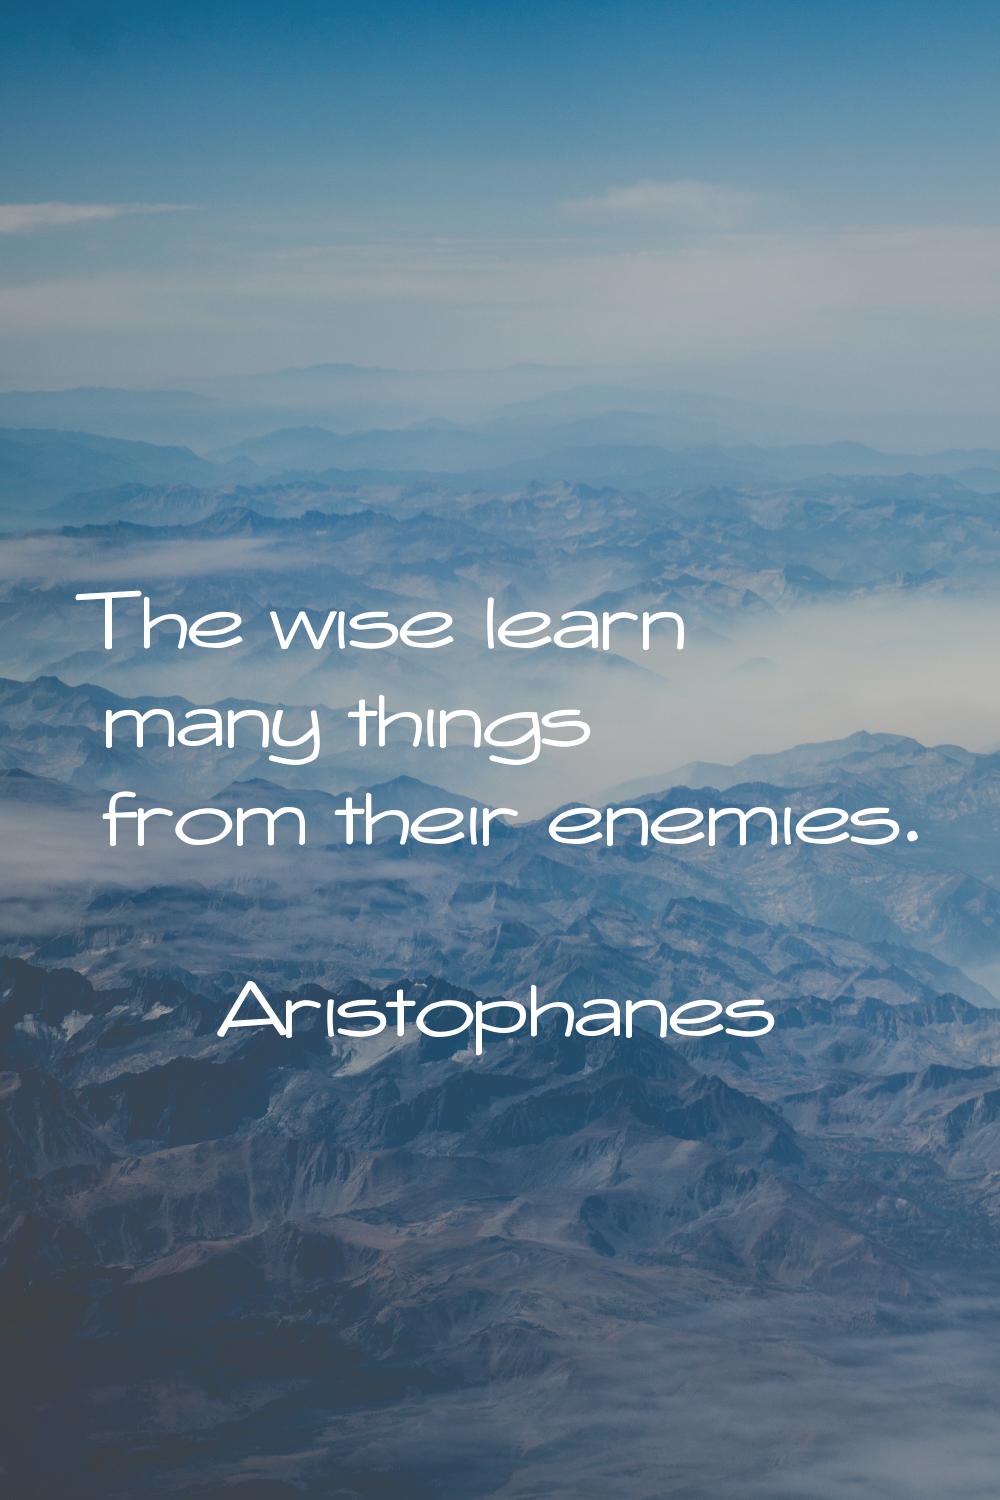 The wise learn many things from their enemies.